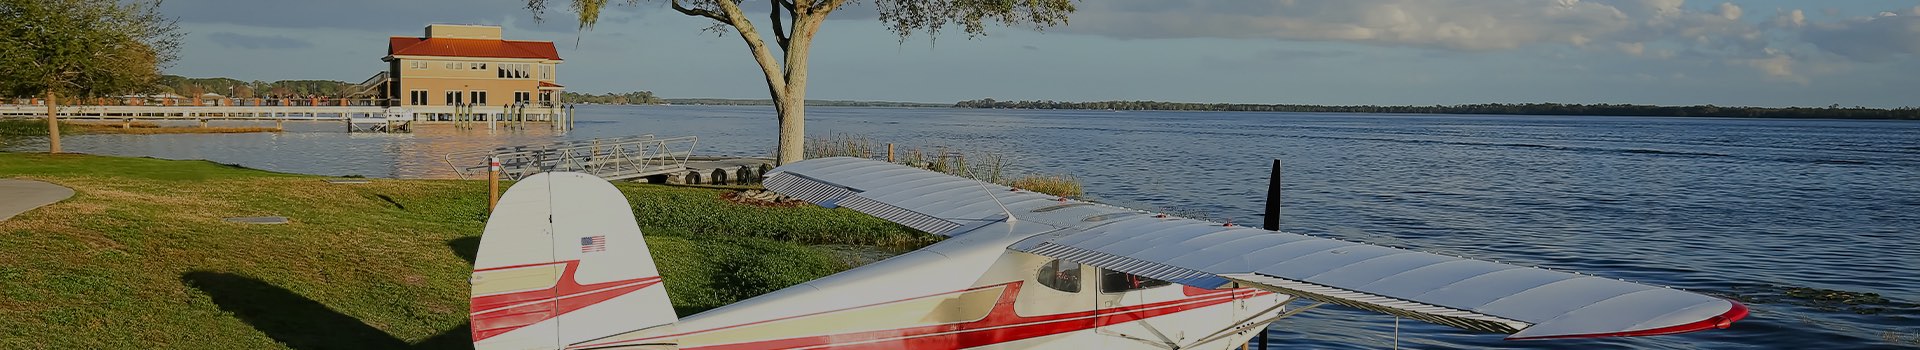 small hangar plane parked by the water